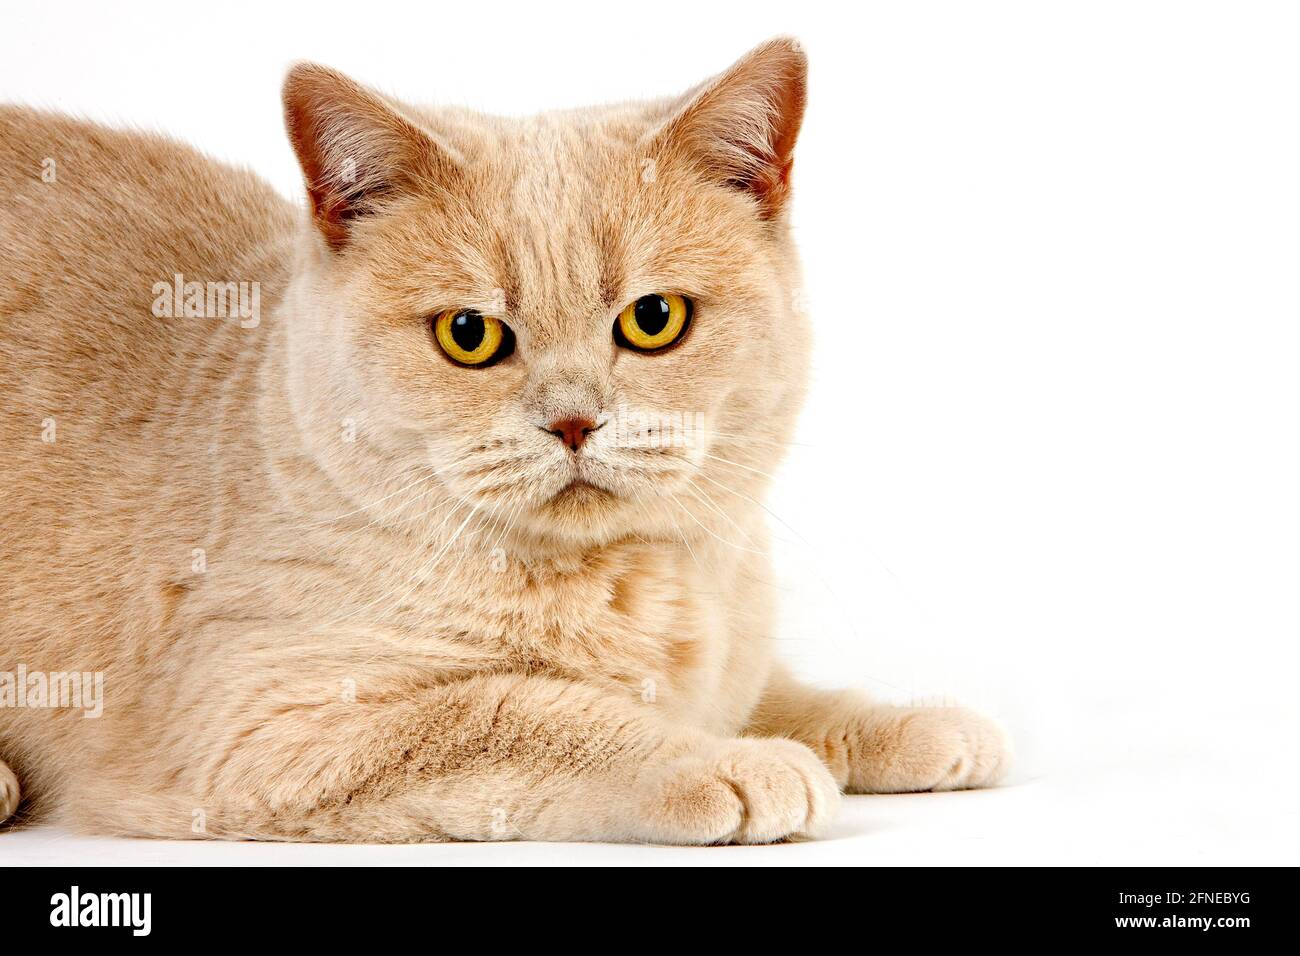 CREAM BRITISH SHORTHAIR CAT, ADULT FEMALE IN FRONT OF WHITE BACKGROUND Stock Photo